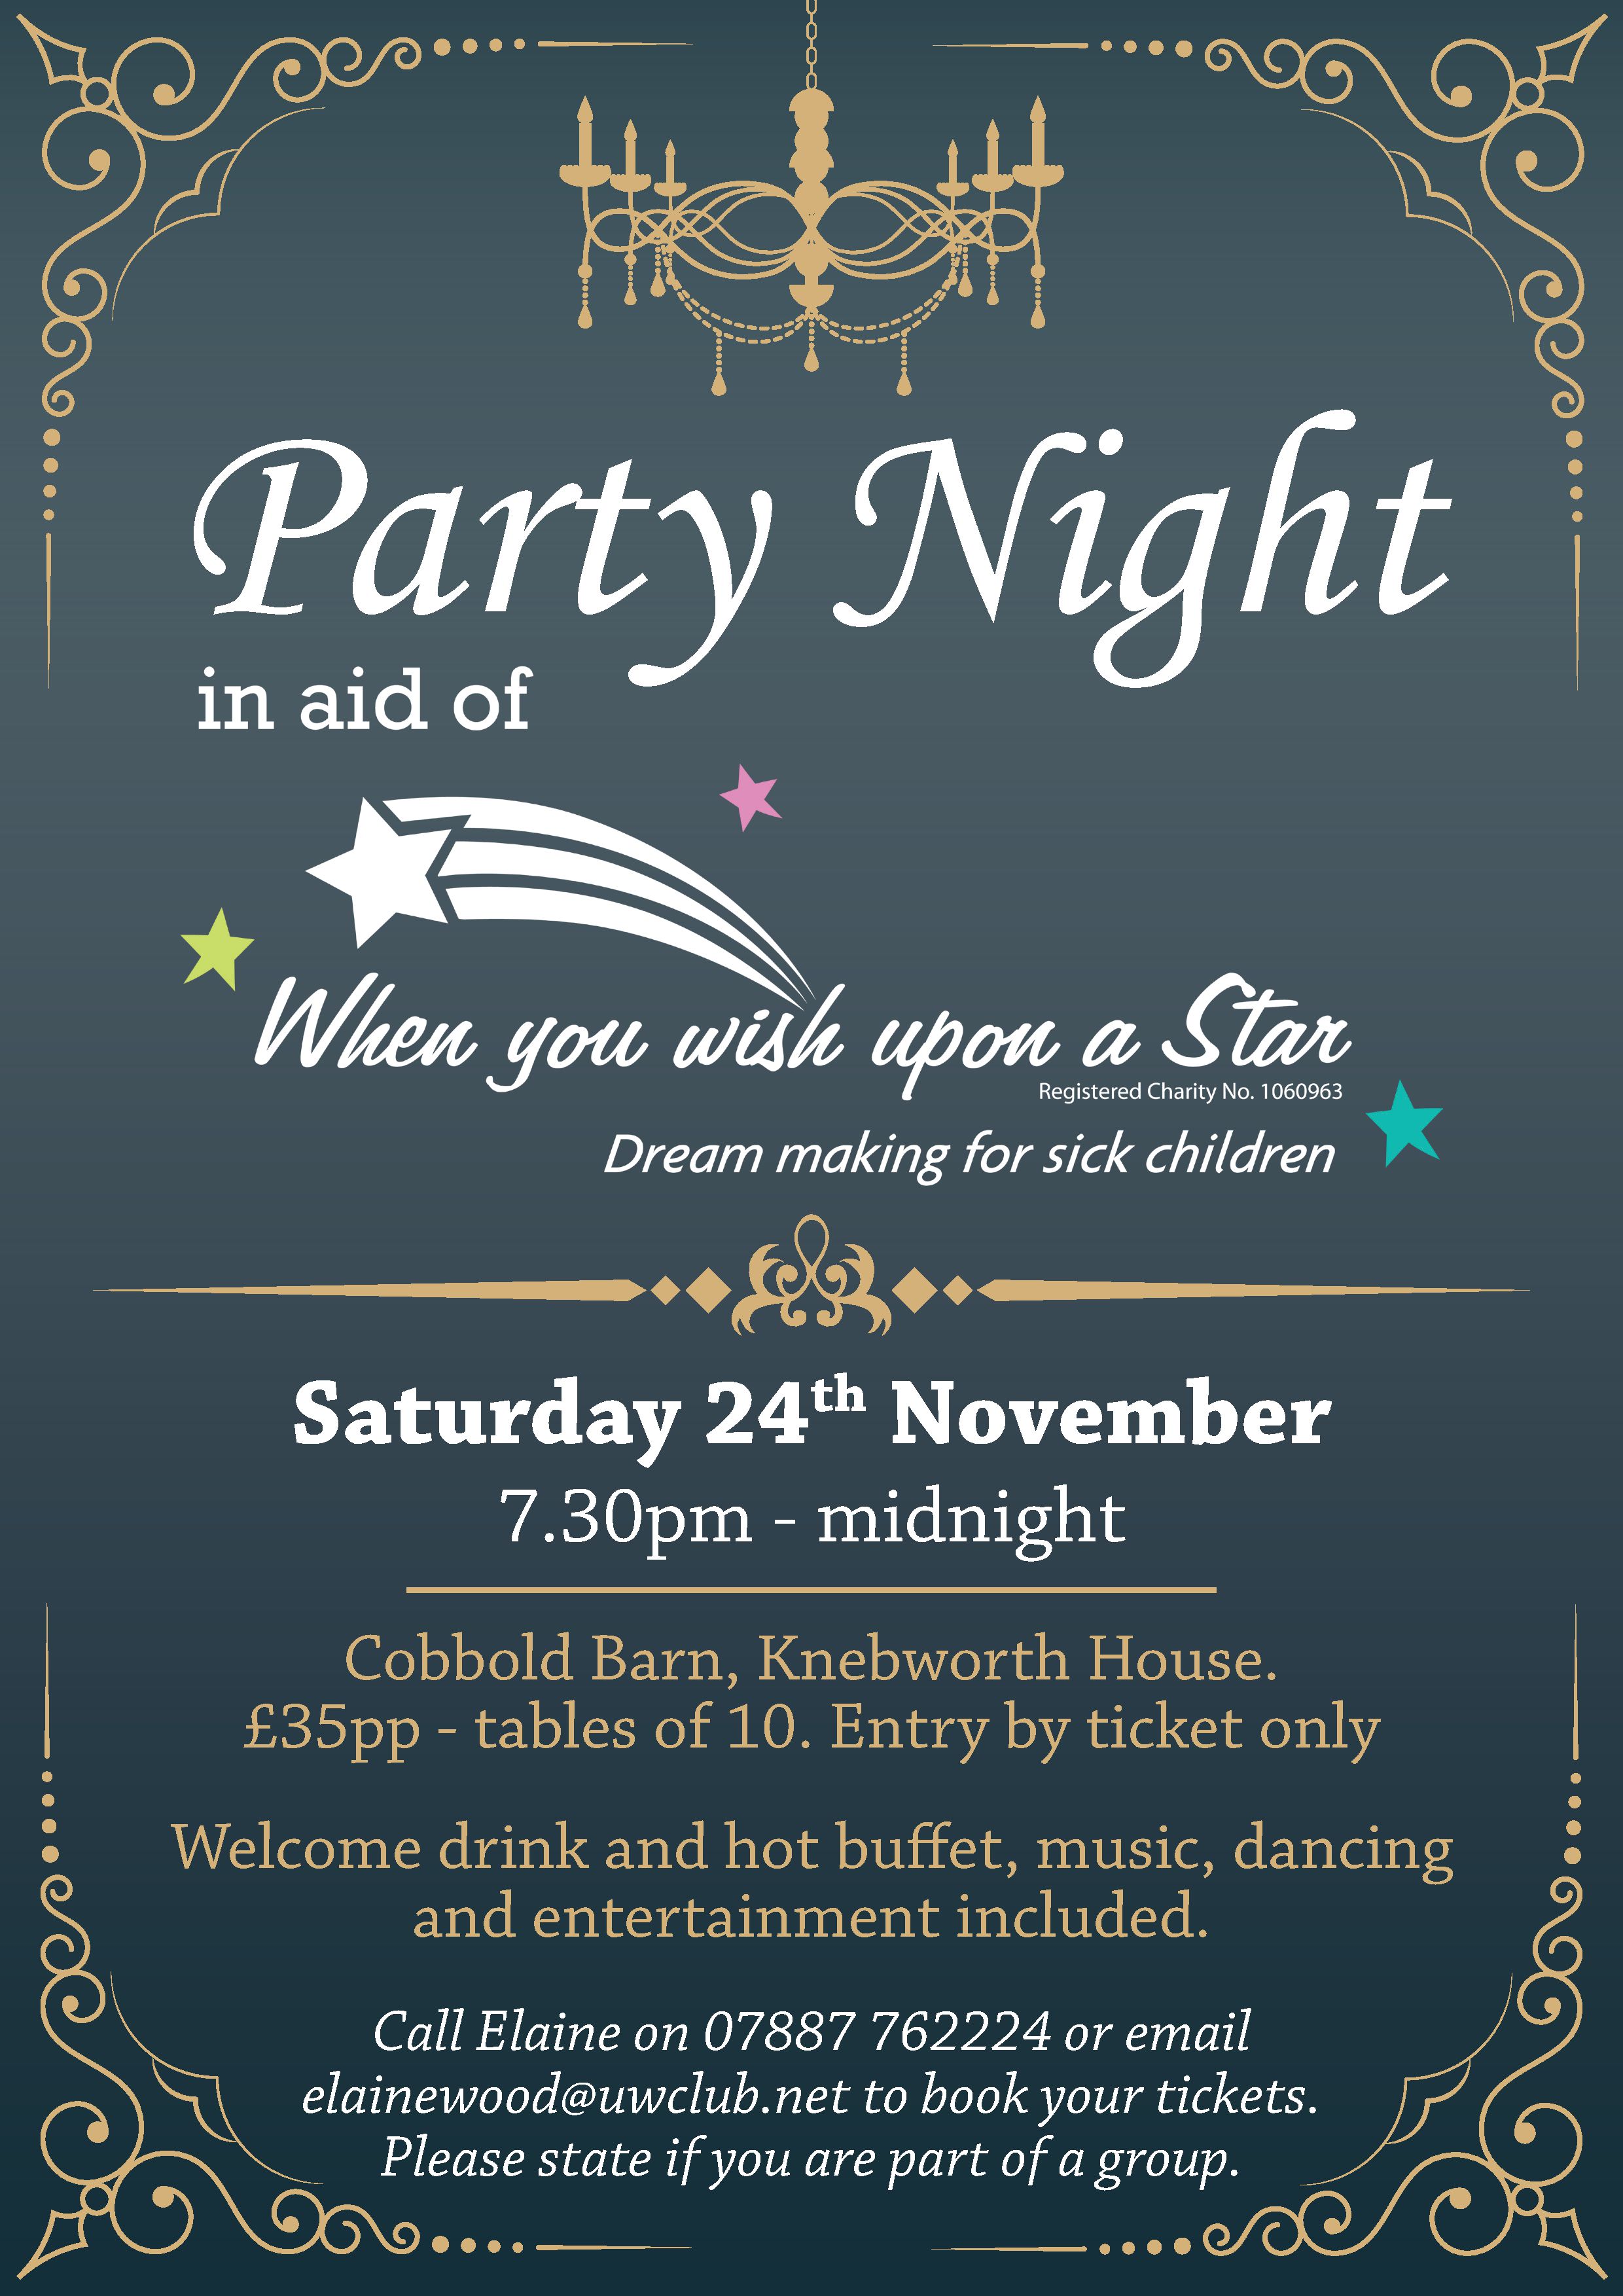 Party Night Poster (1) Elaine Wood